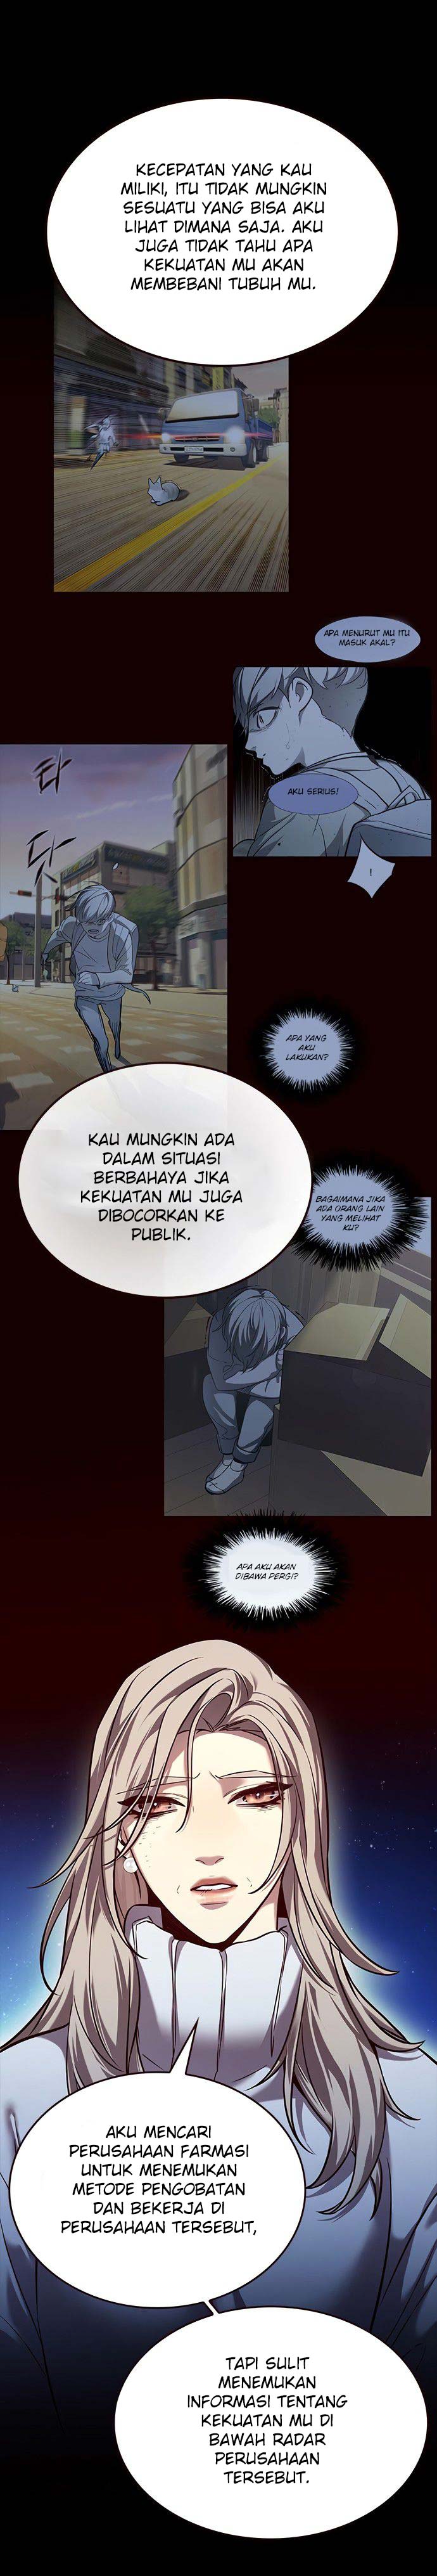 eleceed-indo Chapter 237